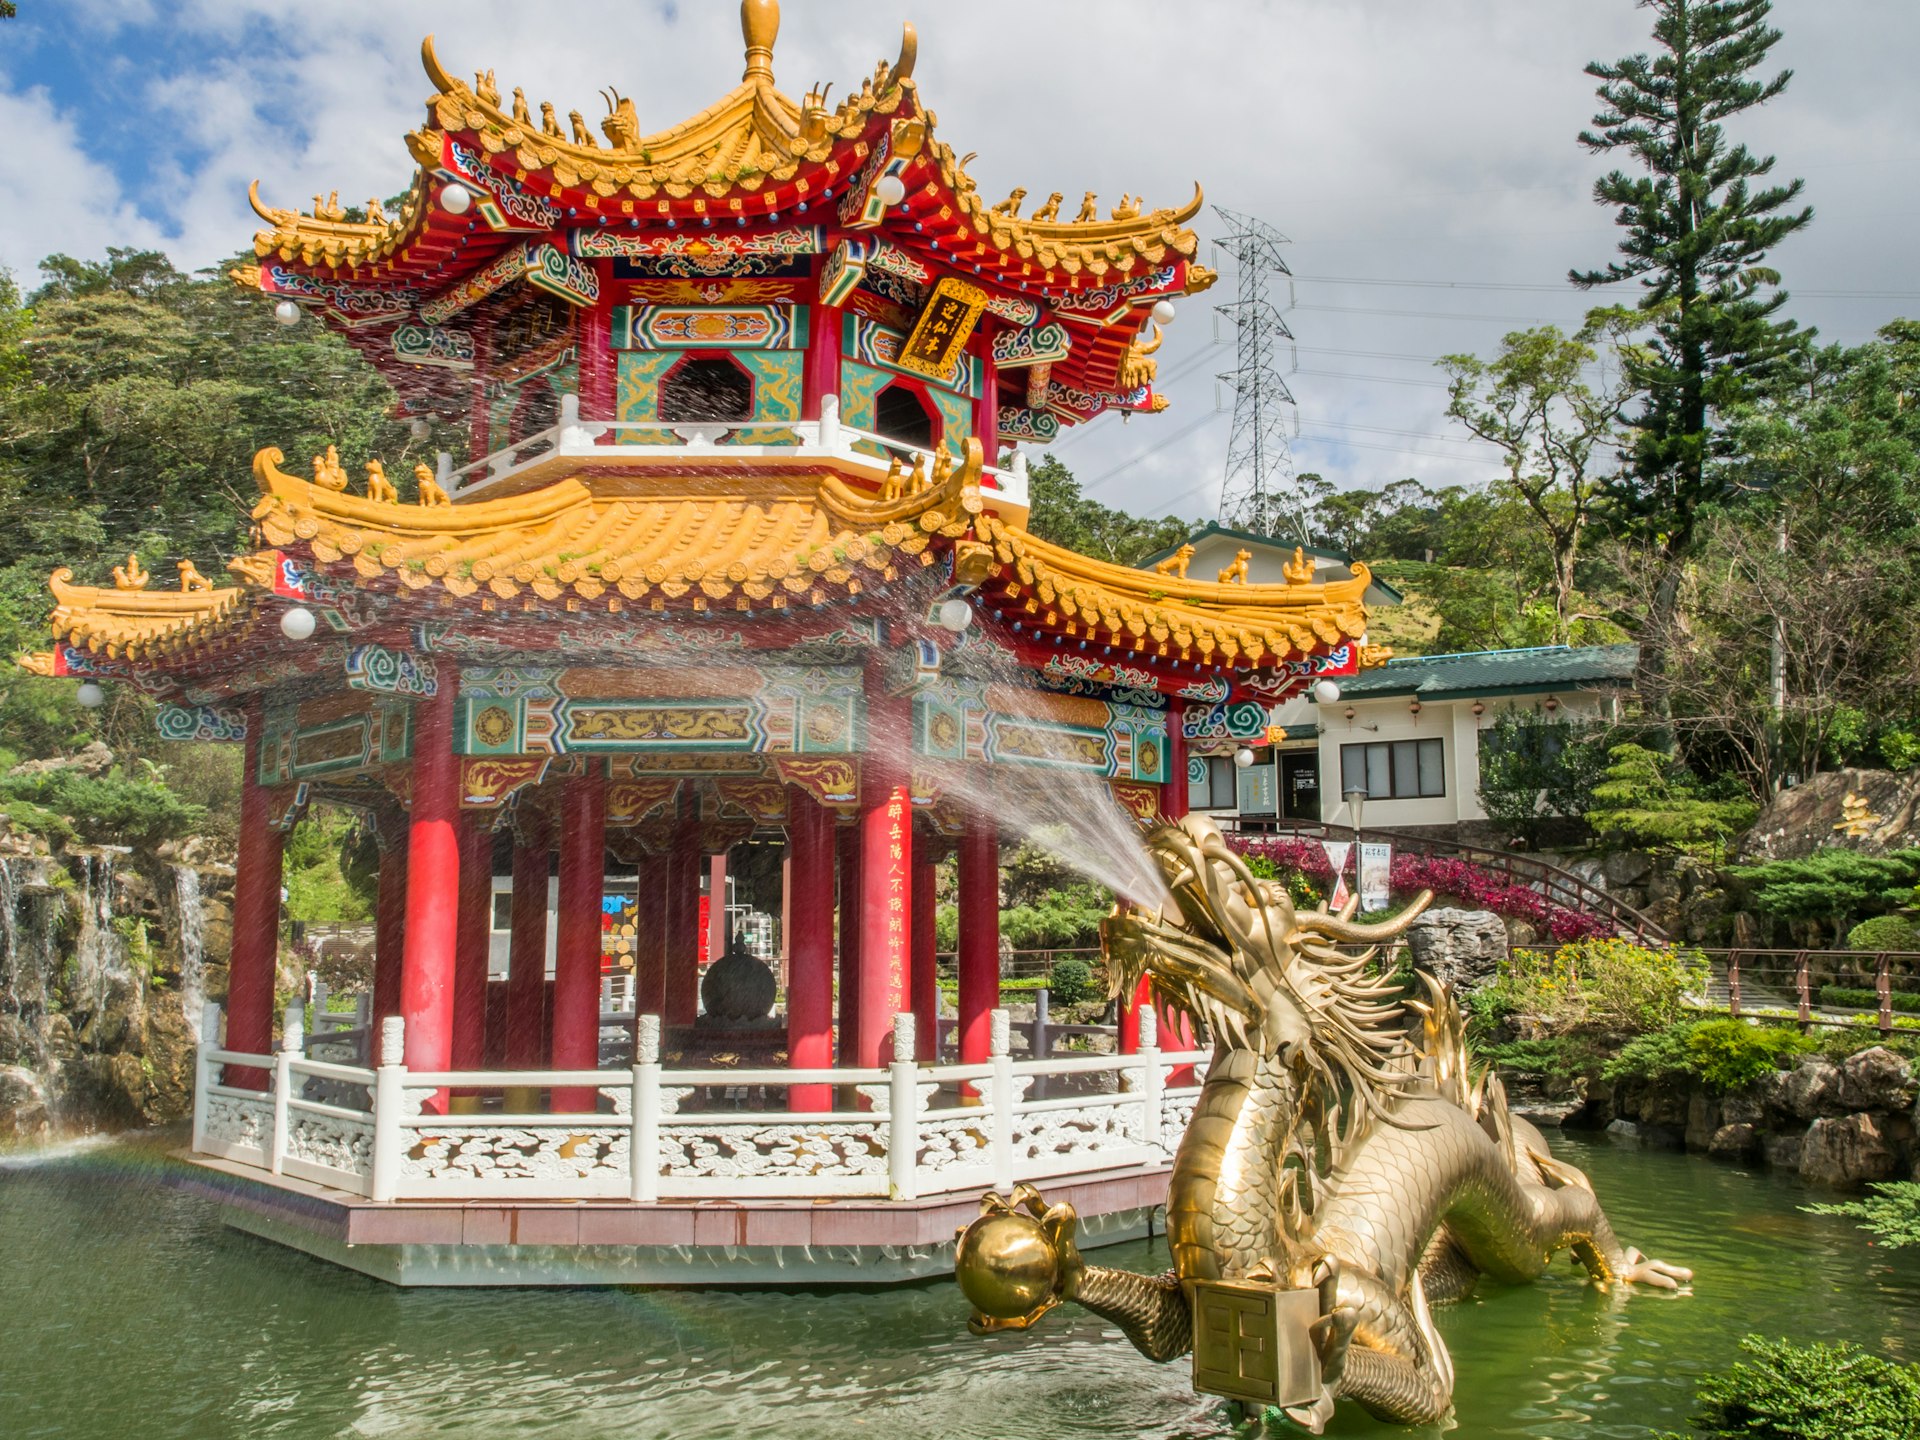 A colorful pagoda floating and a gold dragon fountain with water coming out of its mouth in Taipei, Taiwan, near the Zhinan Temple Station of Maokong Gondola